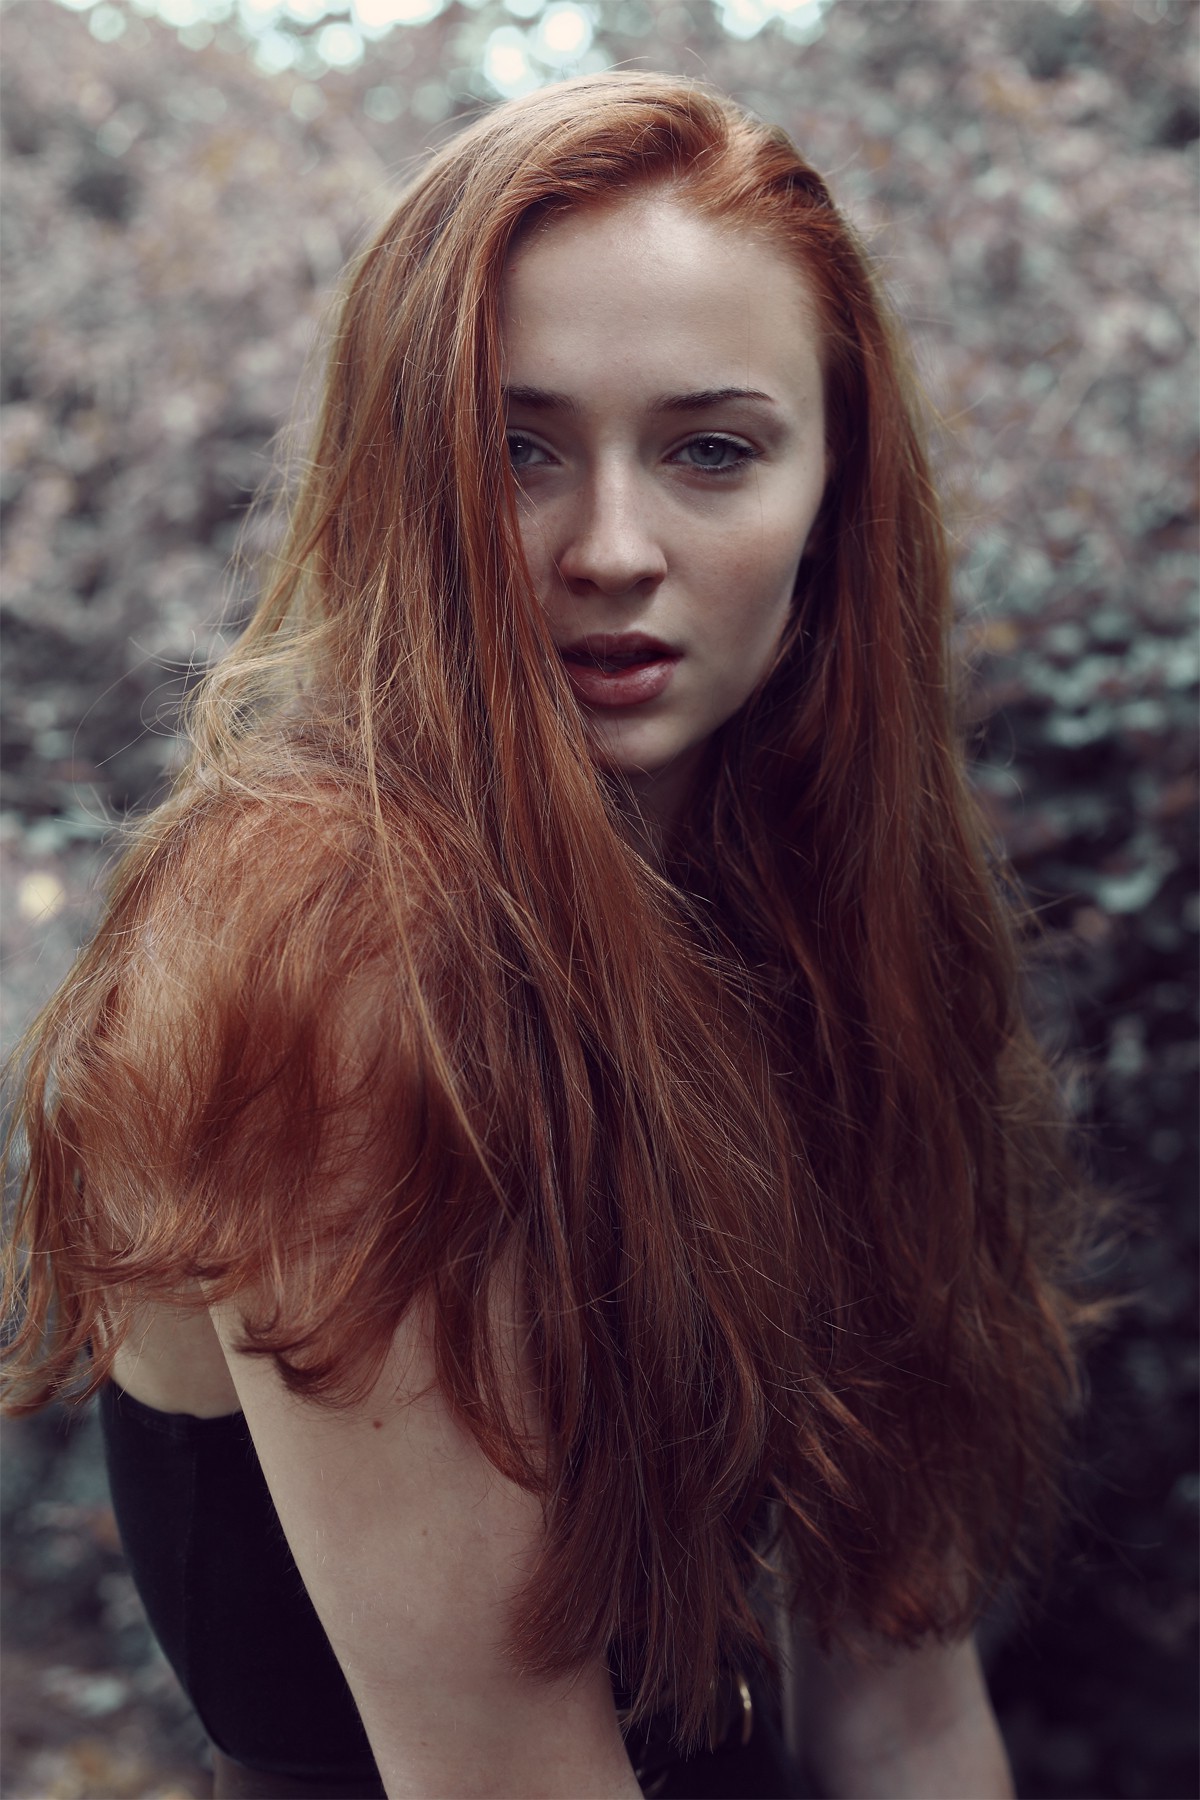 women, Model, Redhead, Long Hair, Portrait Display, Blue Eyes, Looking At Viewer, Face, Portrait, Women Outdoors, Trees, Sophie Turner, Open Mouth, Black Dress, Hair In Face, Bare Shoulders Wallpaper